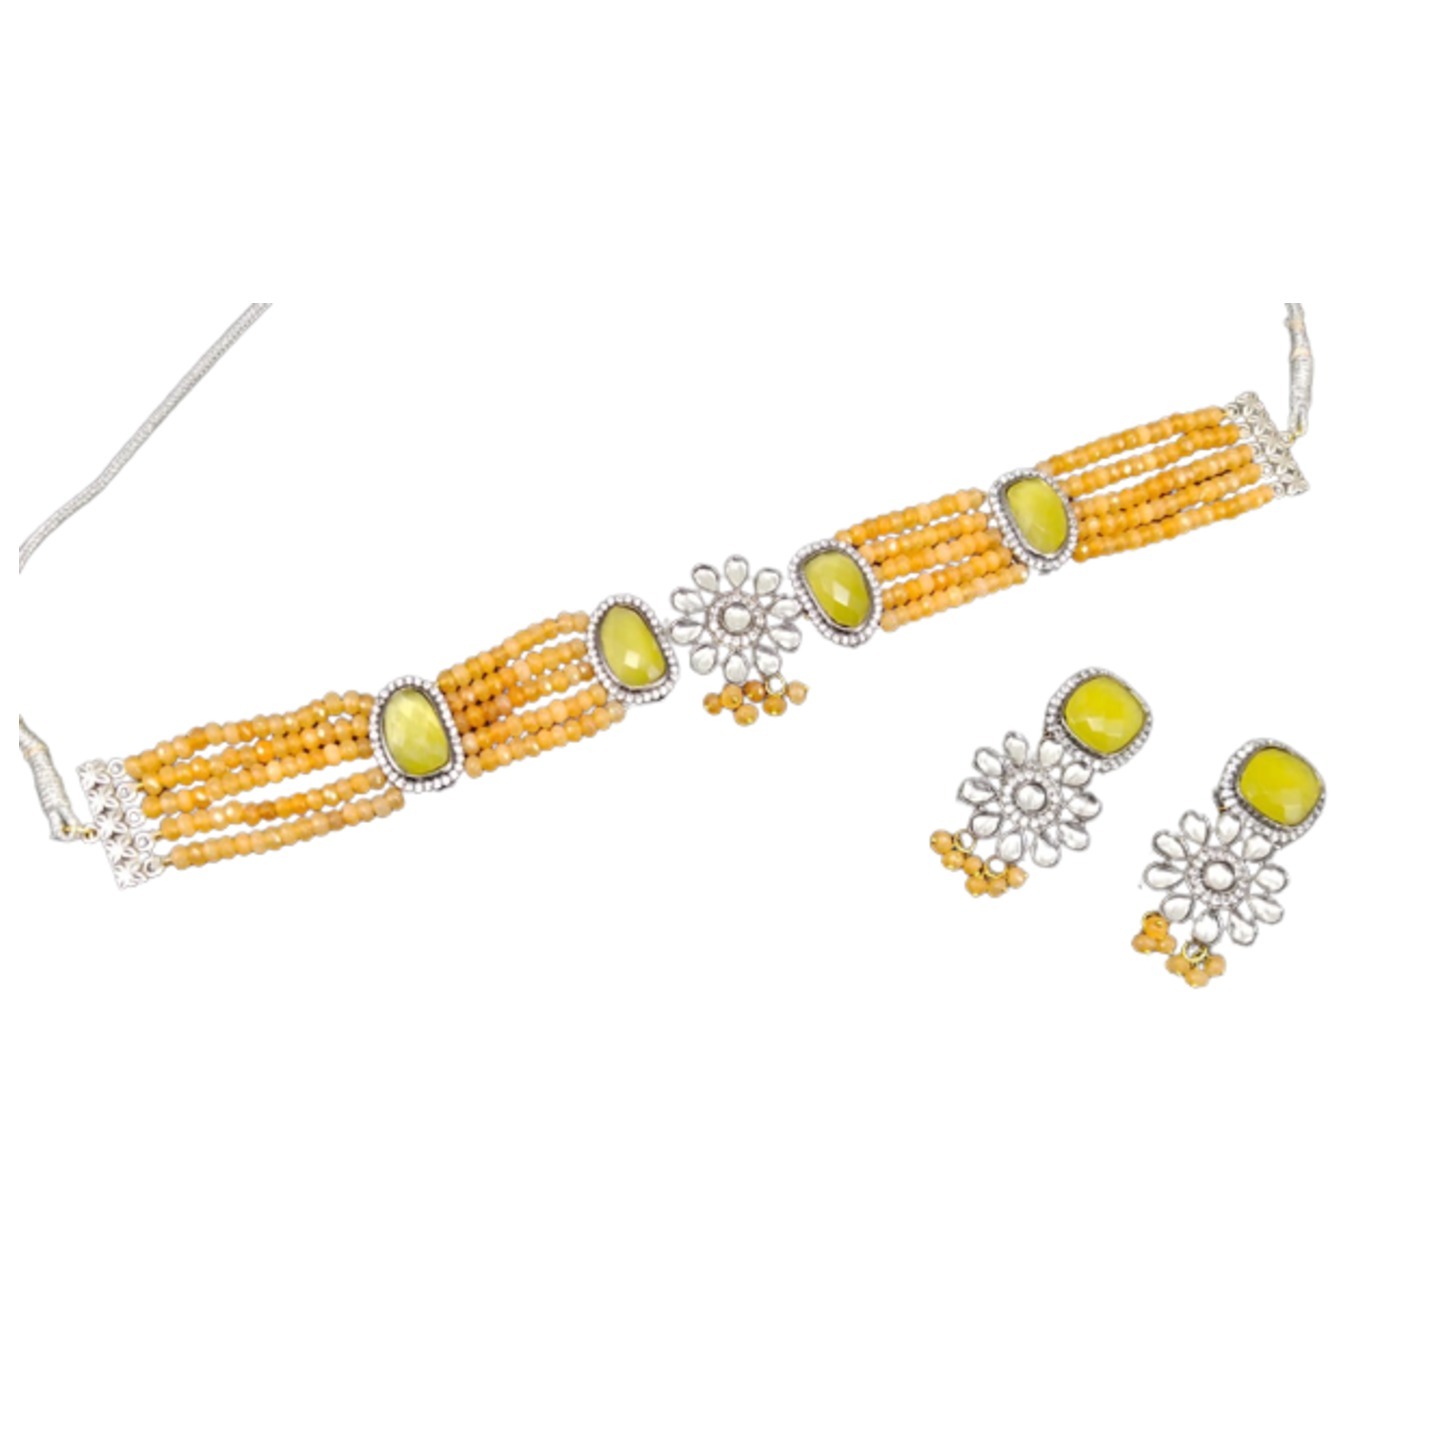 Gold Tone Kundan Choker Necklace Set With Earring Yellow Onyx Pearls